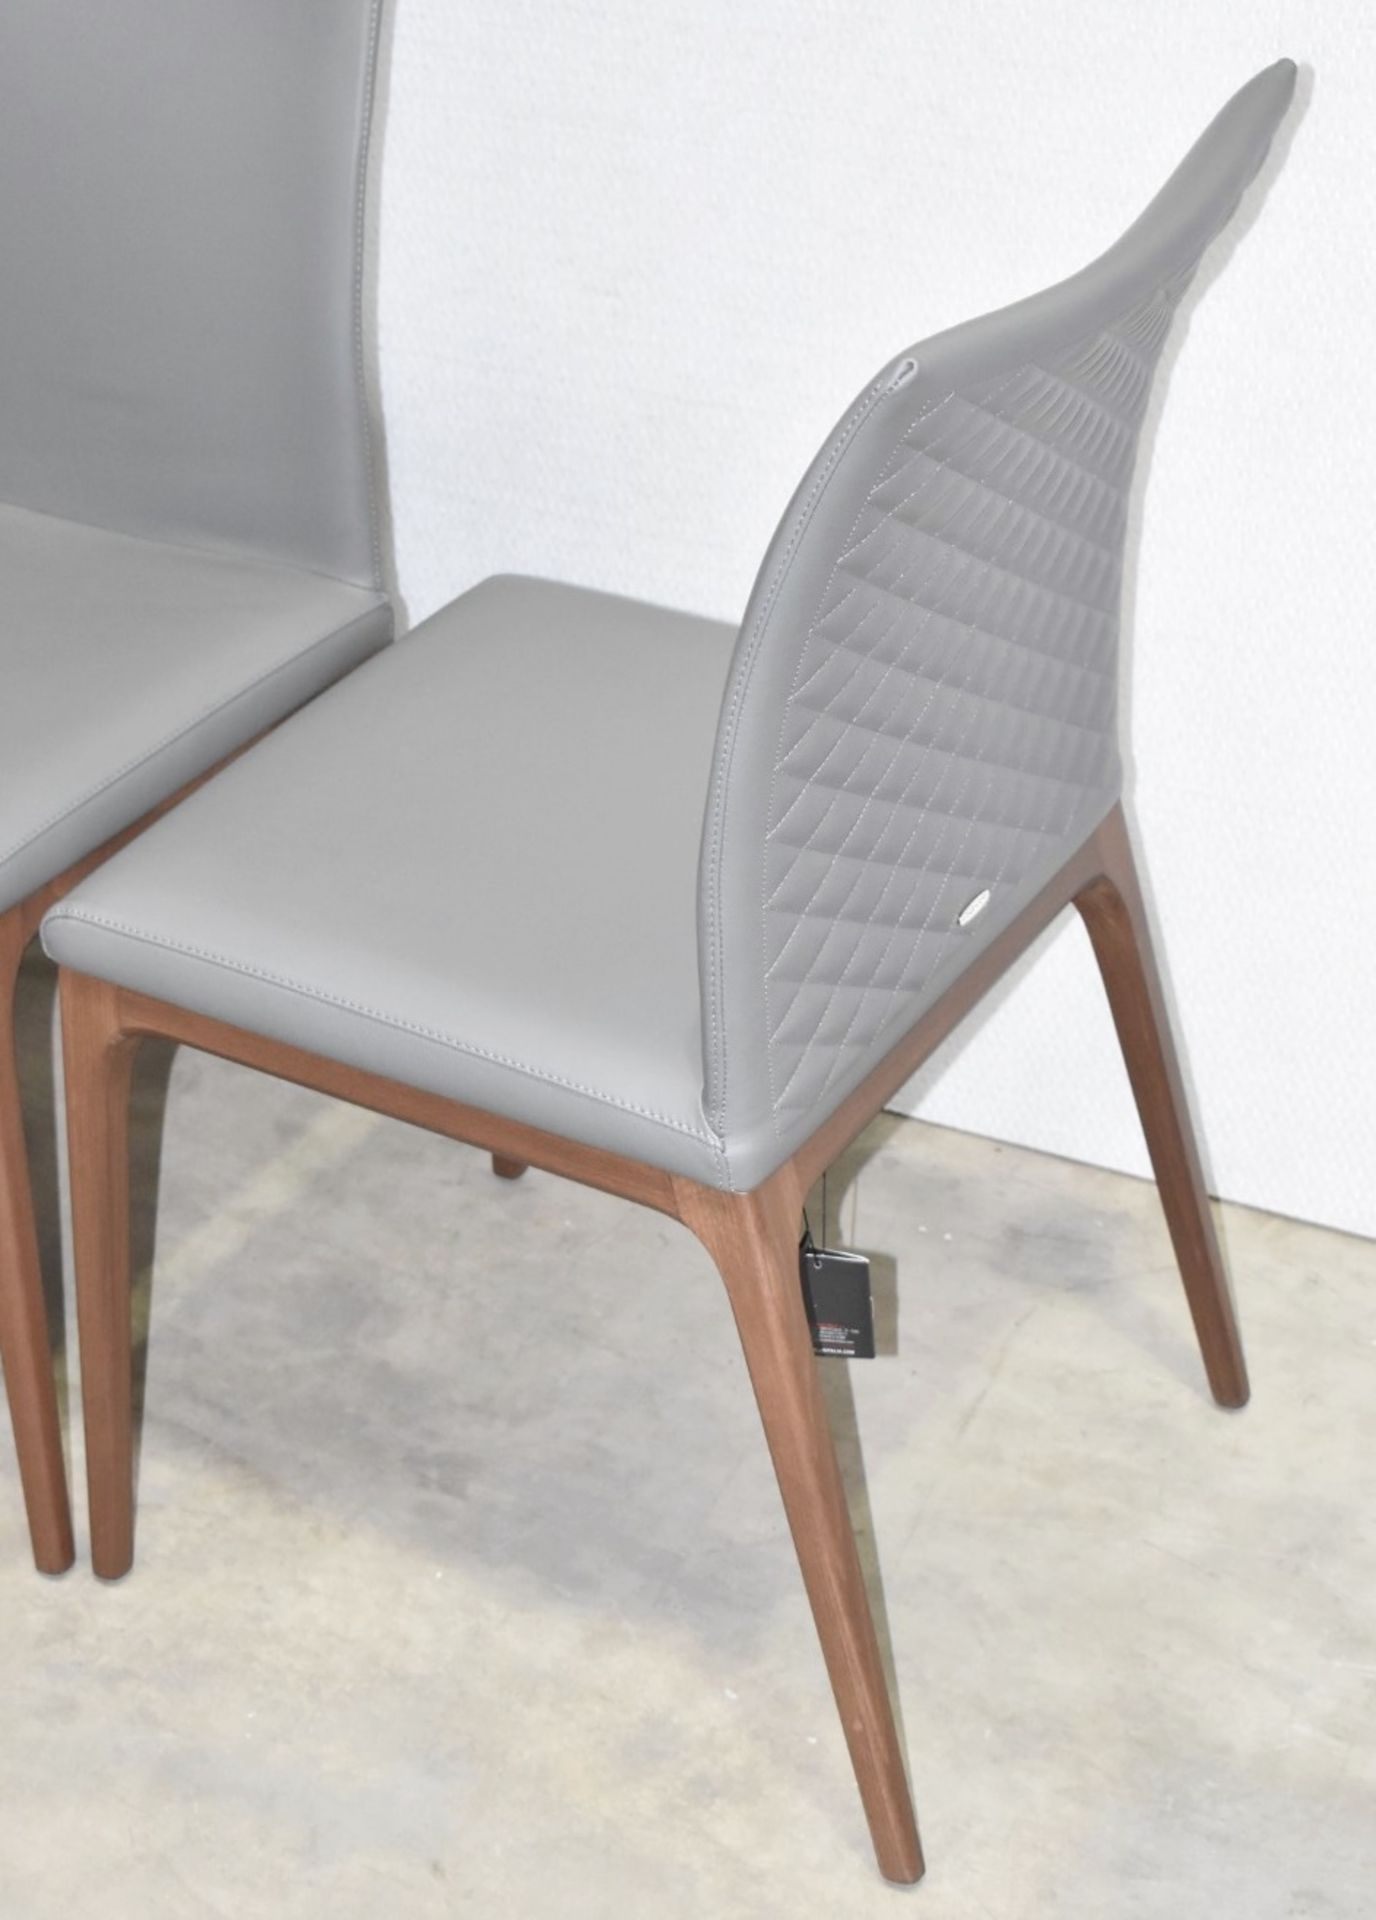 4 x CATTELAN ITALIA 'Arcadia Couture' Leather Upholstered Dining Chairs - Total Original RRP £3,540 - Image 16 of 19